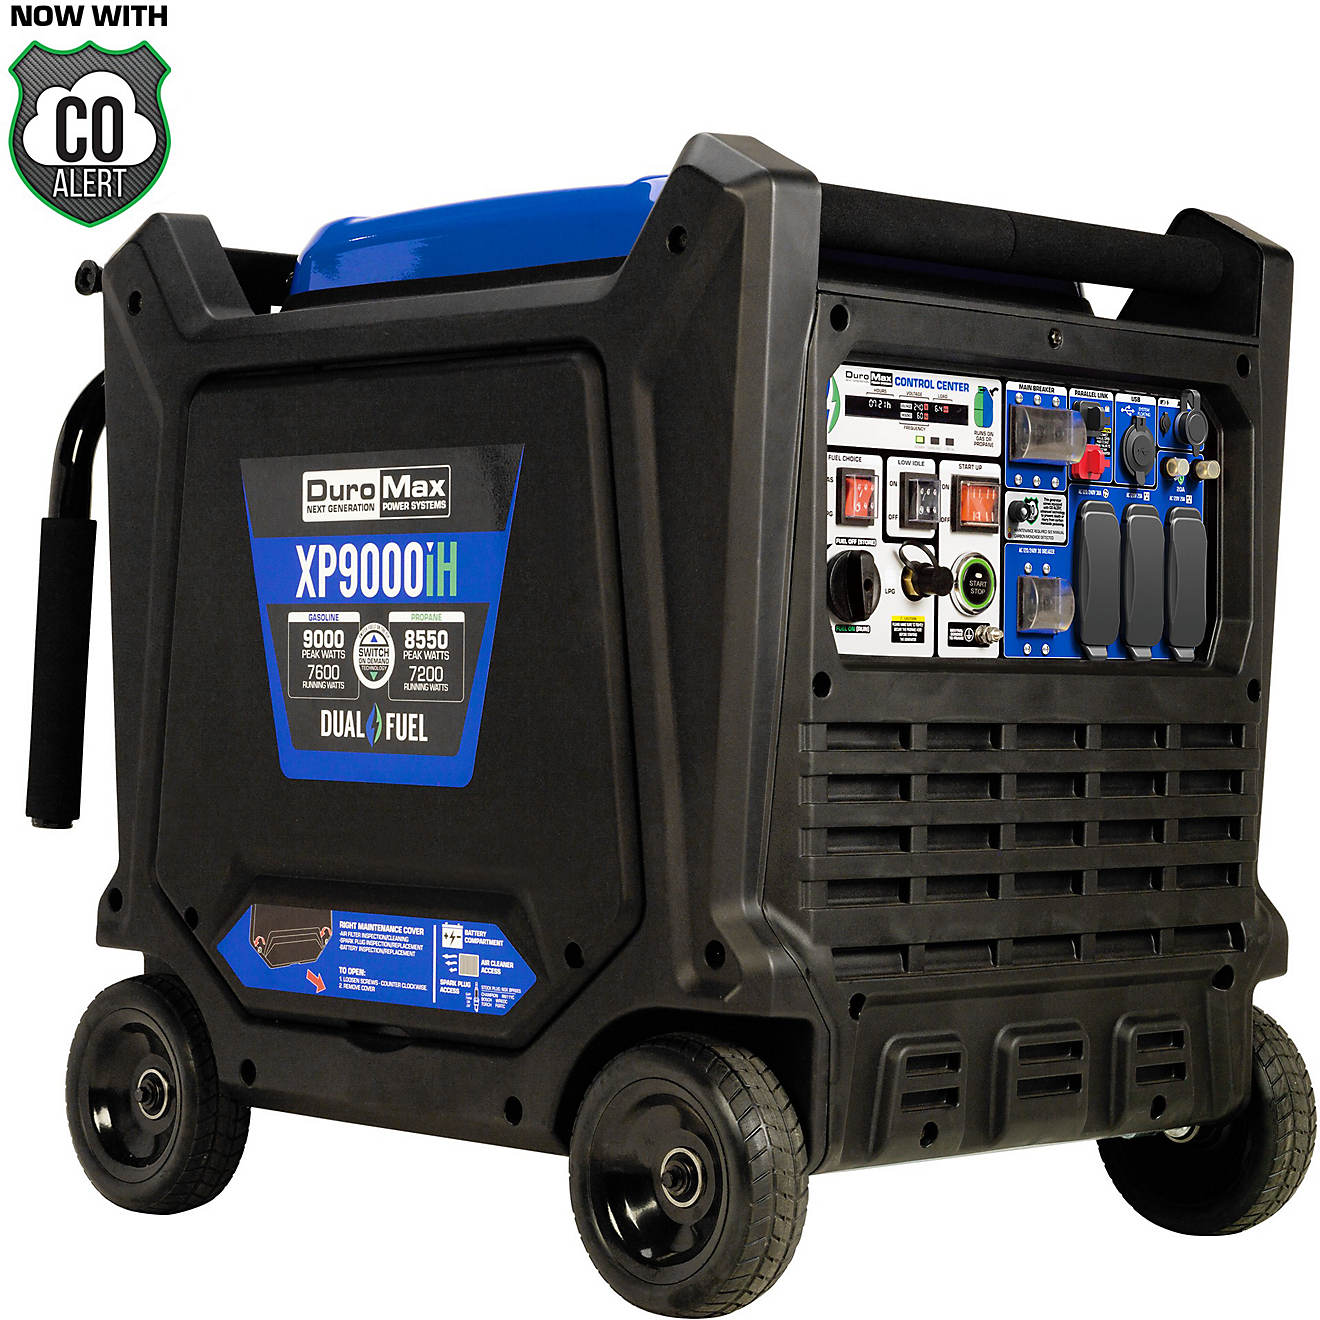 DuroMax 9,000 W 459cc Dual Fuel Digital Inverter Hybrid Portable Generator with CO Alert                                         - view number 1